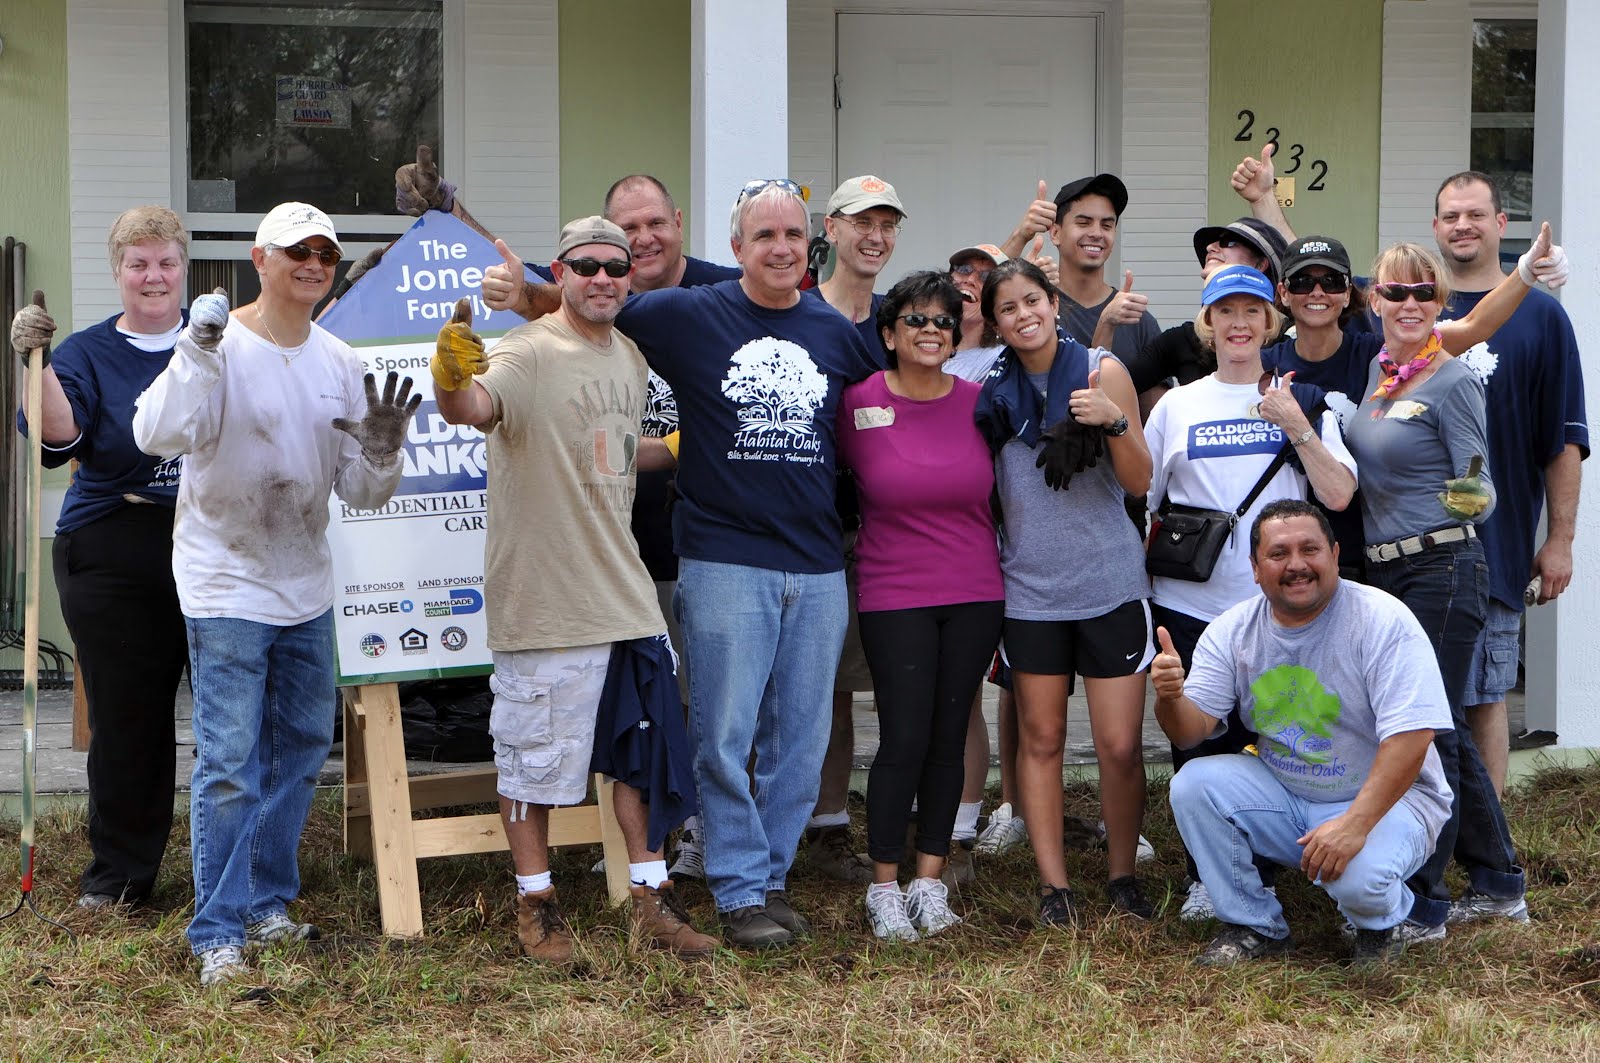 Coral Gables Office Helps Habitat For Humanity